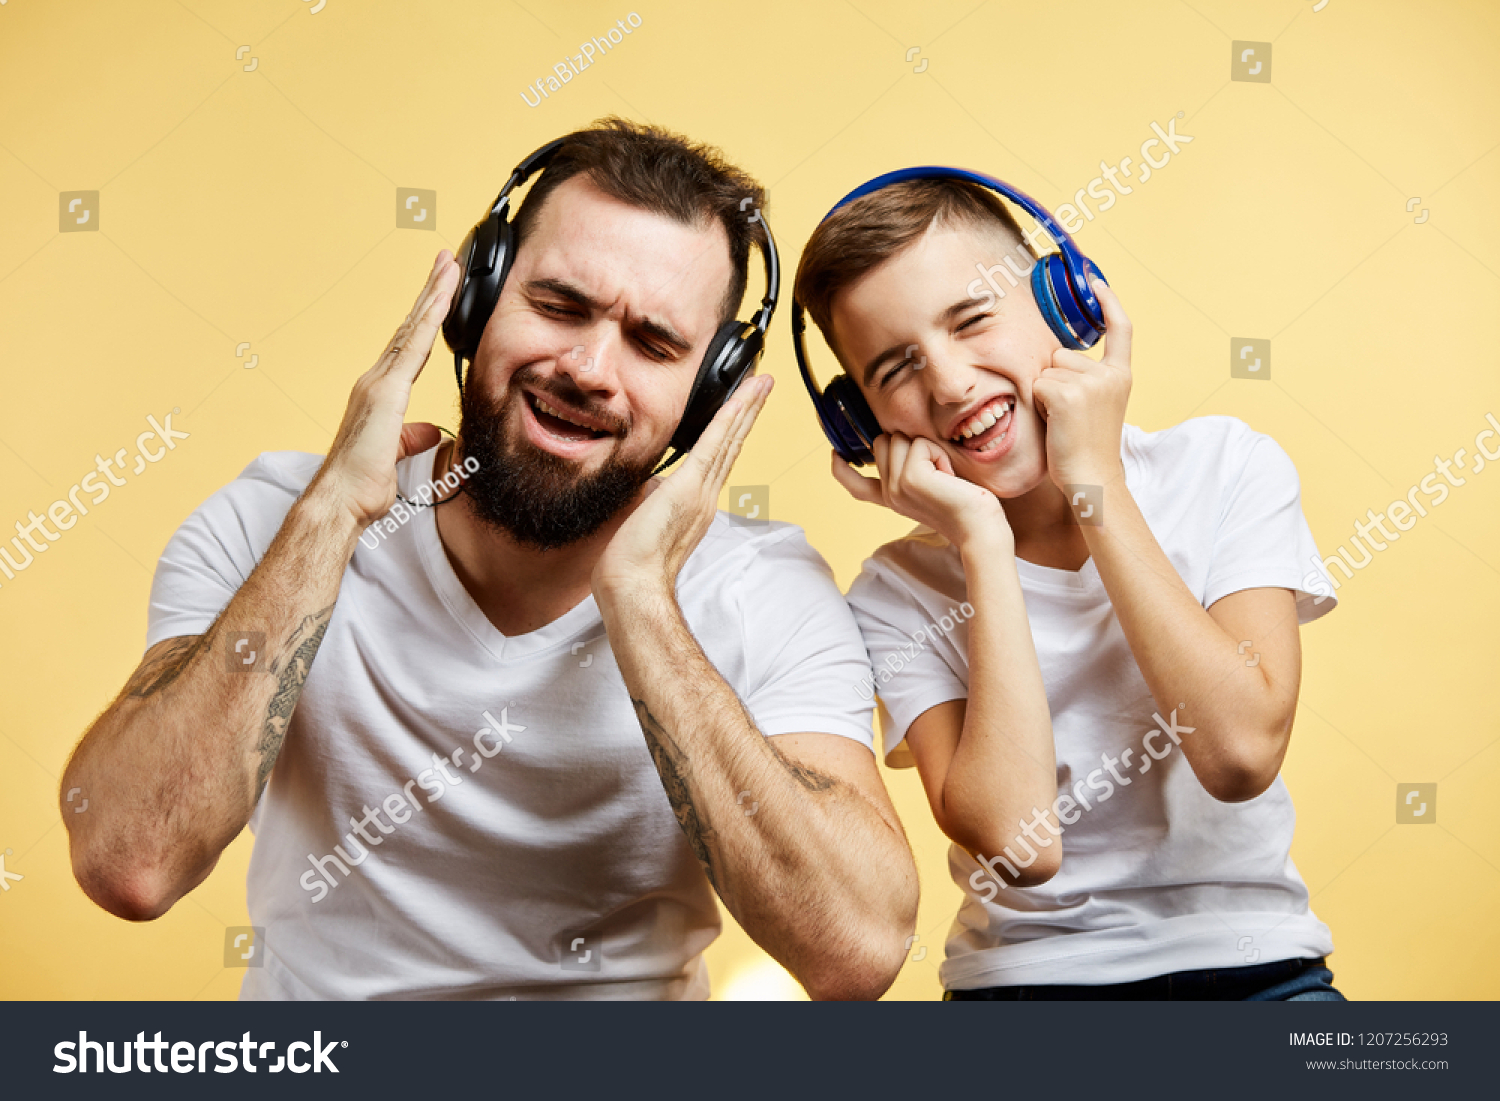 Bearded father and his son in headphones listen to music on yellow background #1207256293